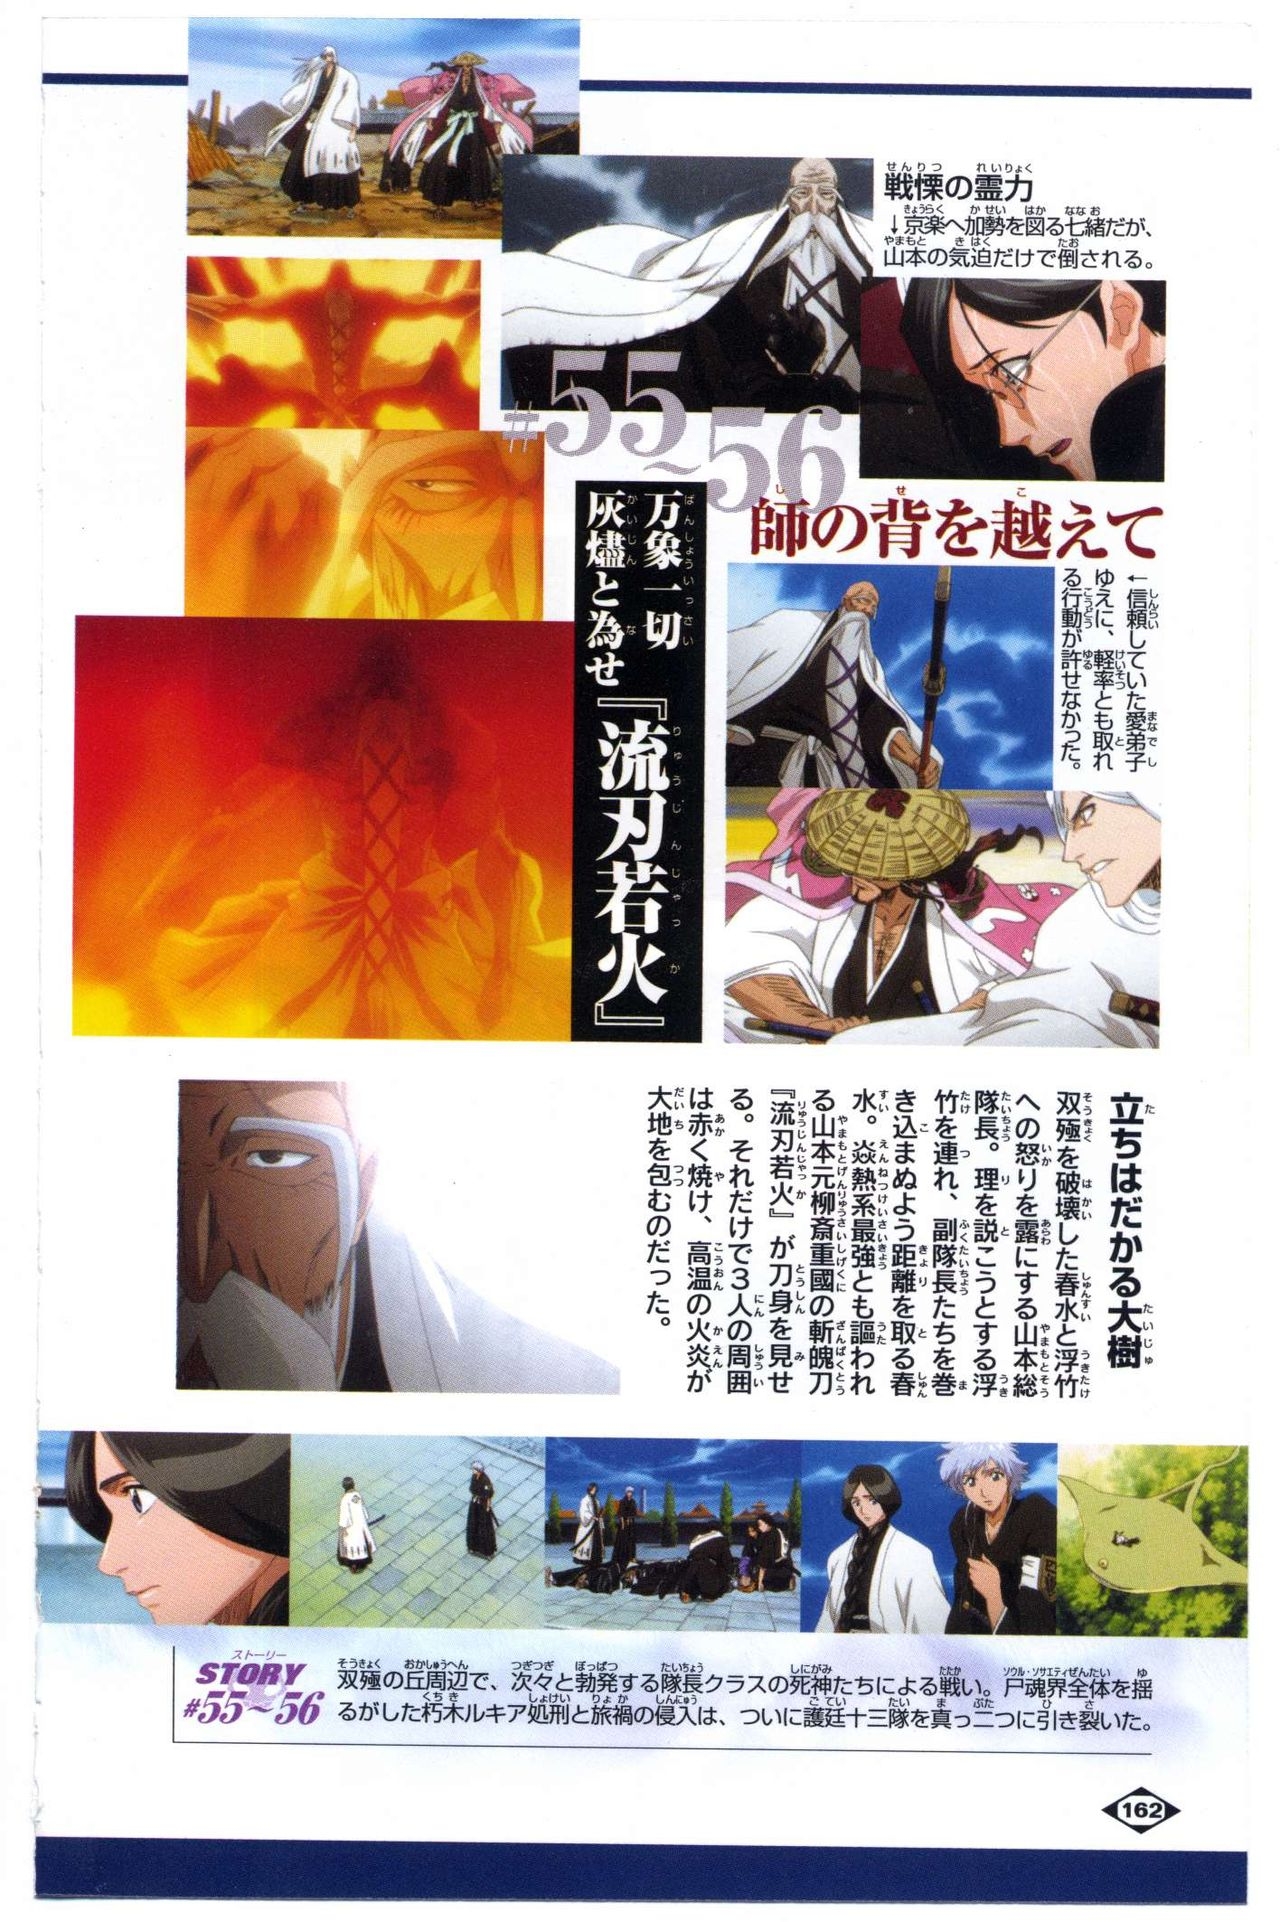 Bleach: Official Animation Book VIBEs 162